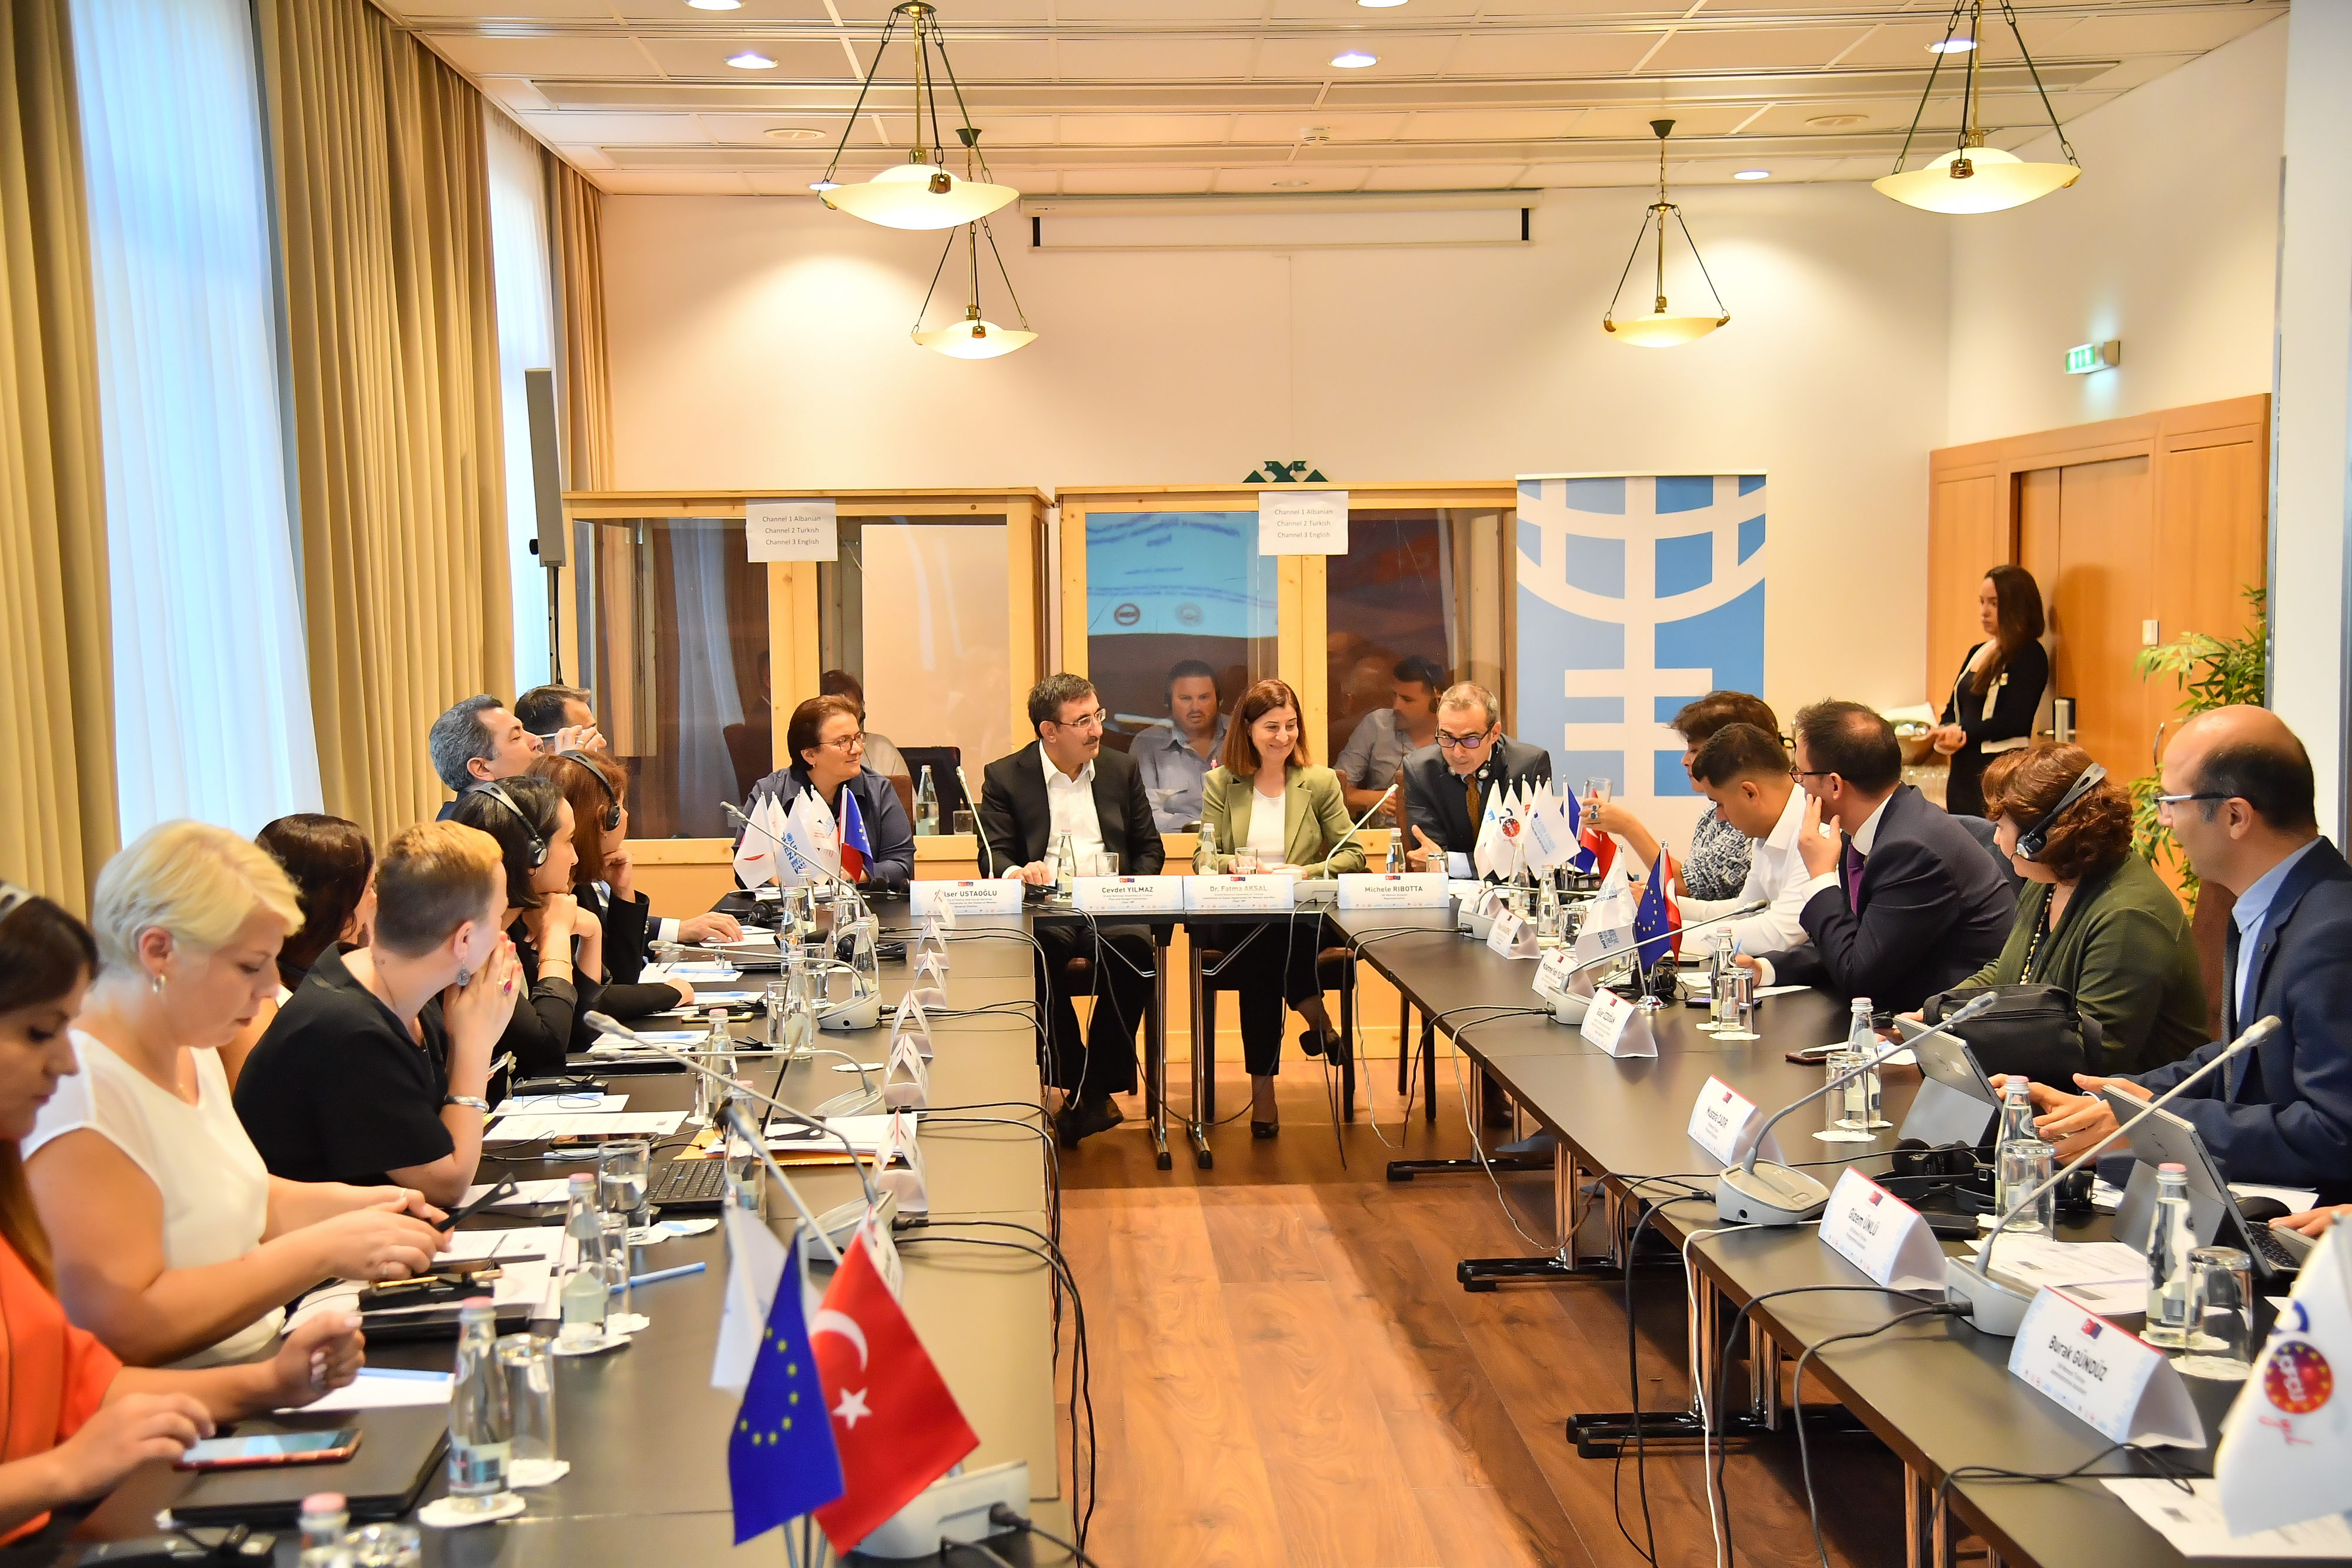 High-level officials from Türkiye and Albania discuss and exchange knowledge on how gender-responsive budgeting is implemented in both countries. Photo: UN Women/Edi Pagria.